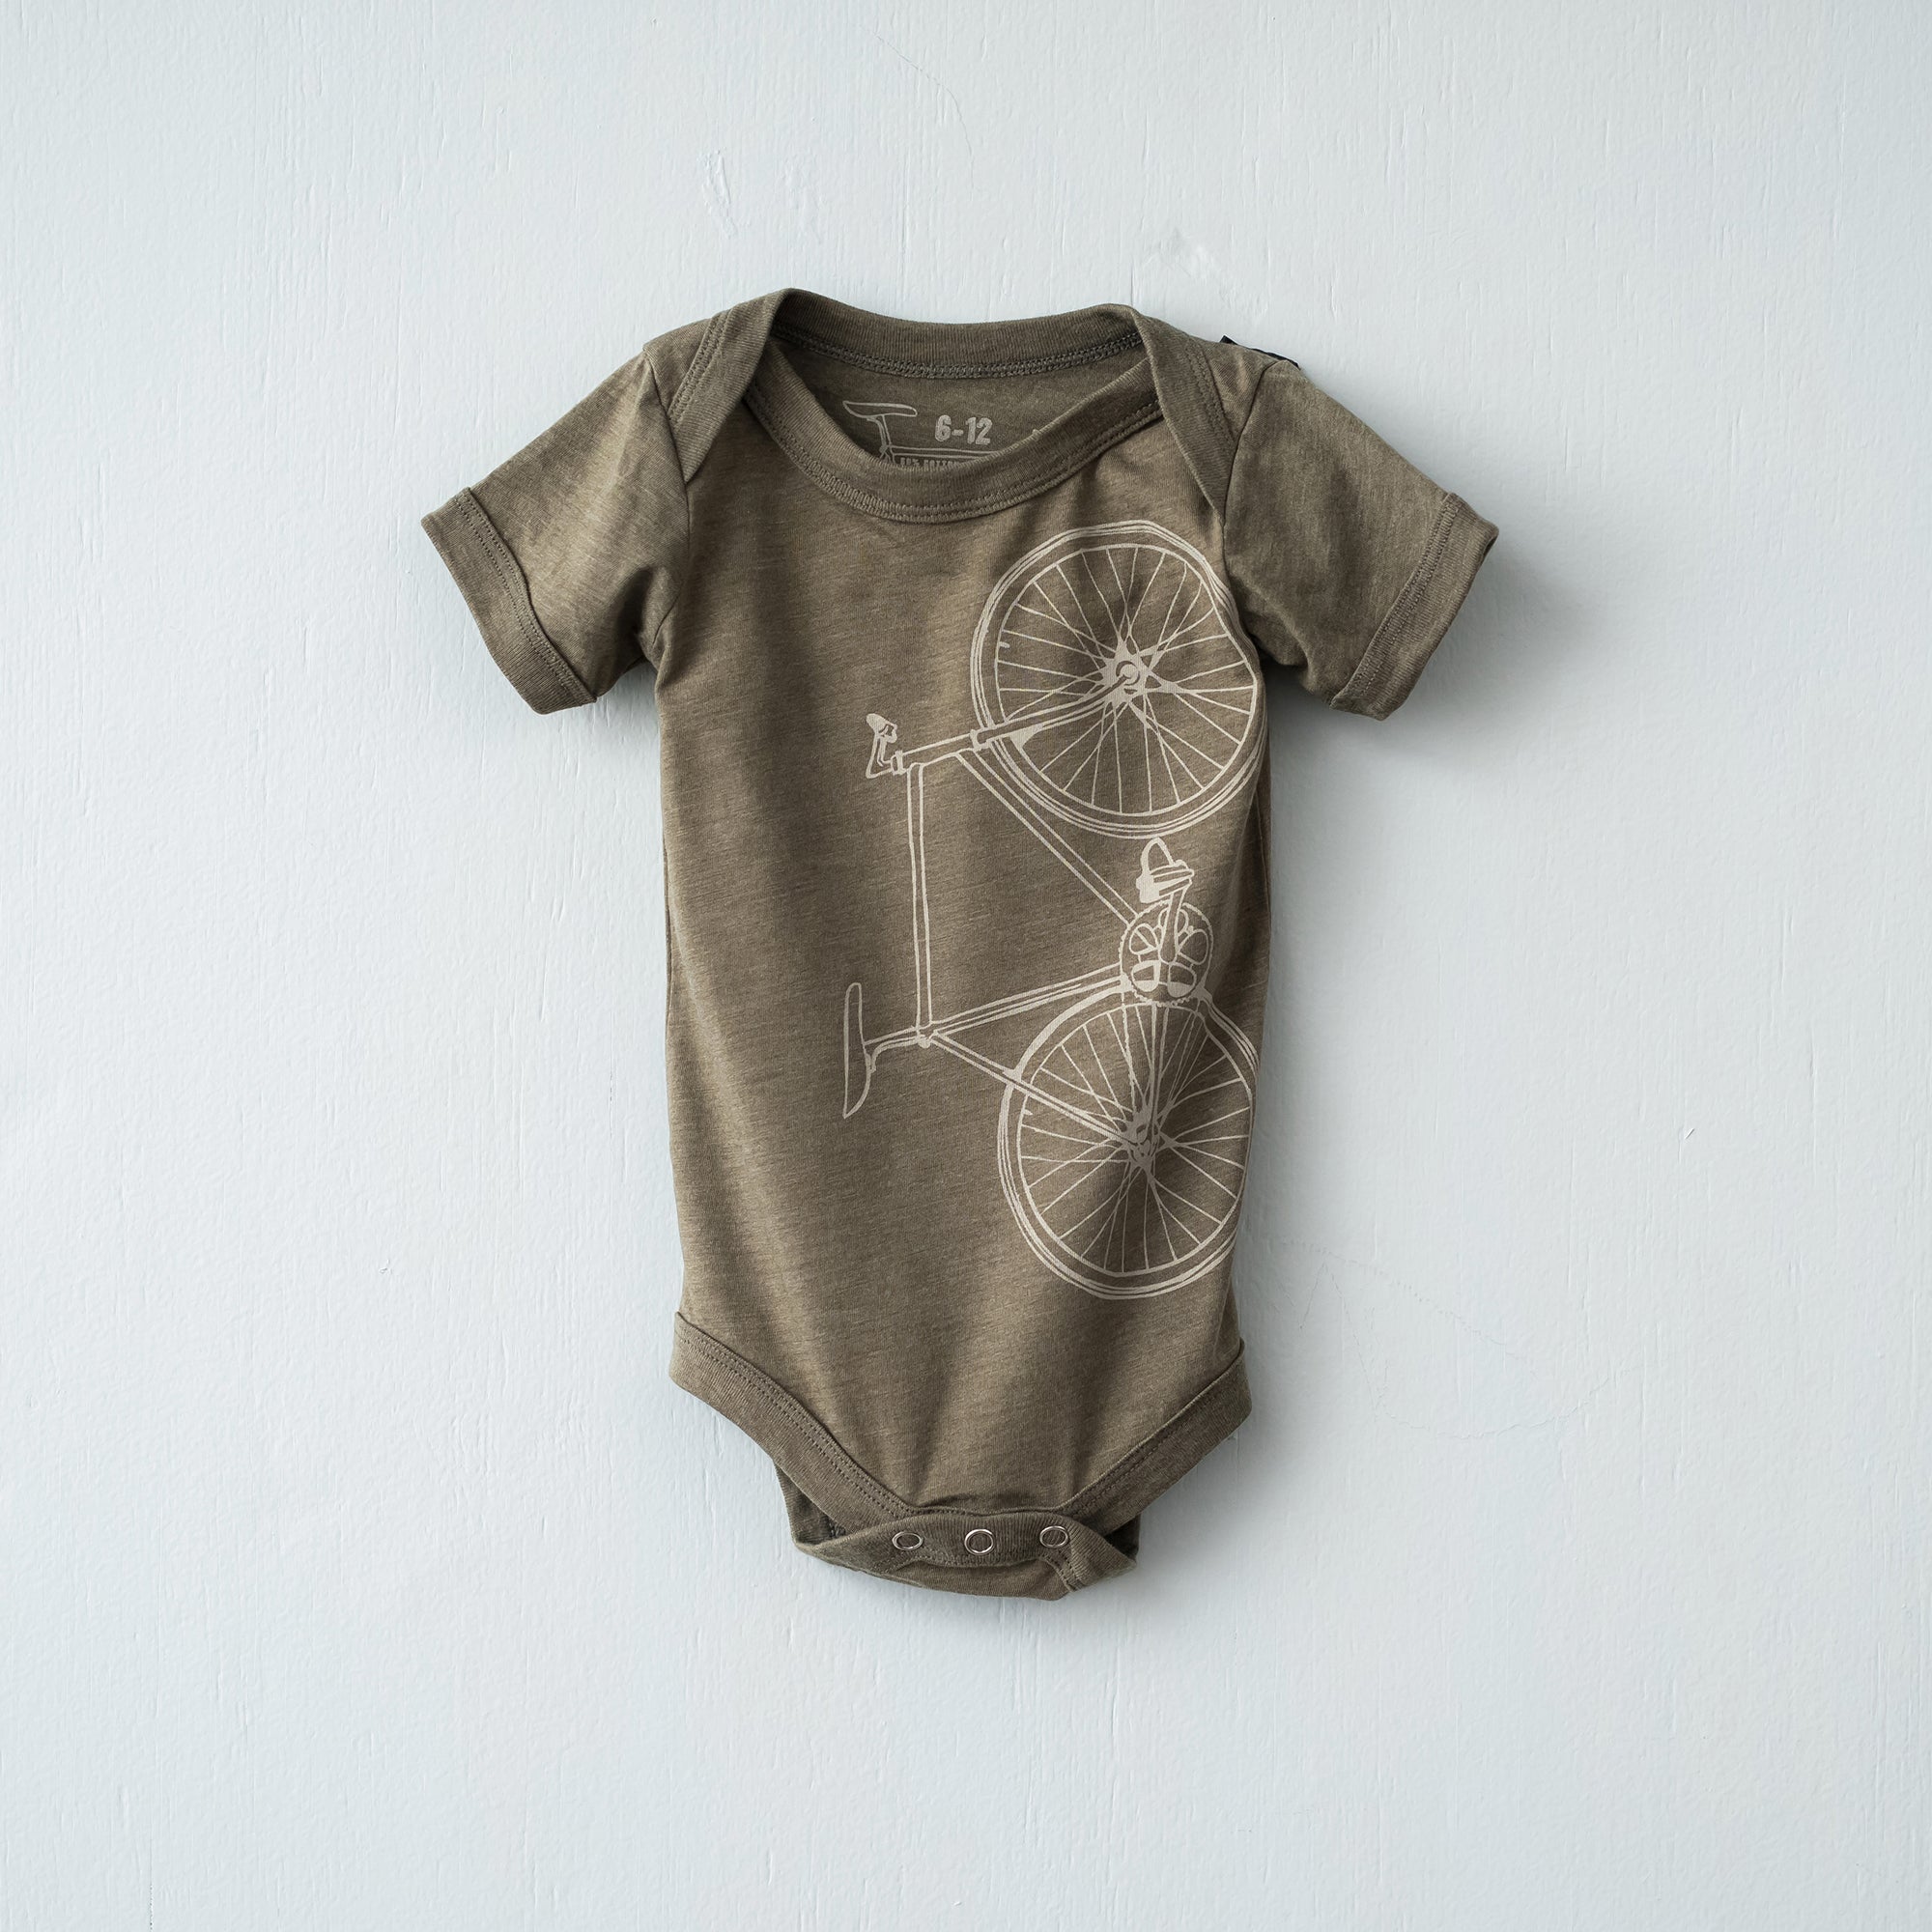 Olive infant one piece screen printed with a cream fixie bicycle